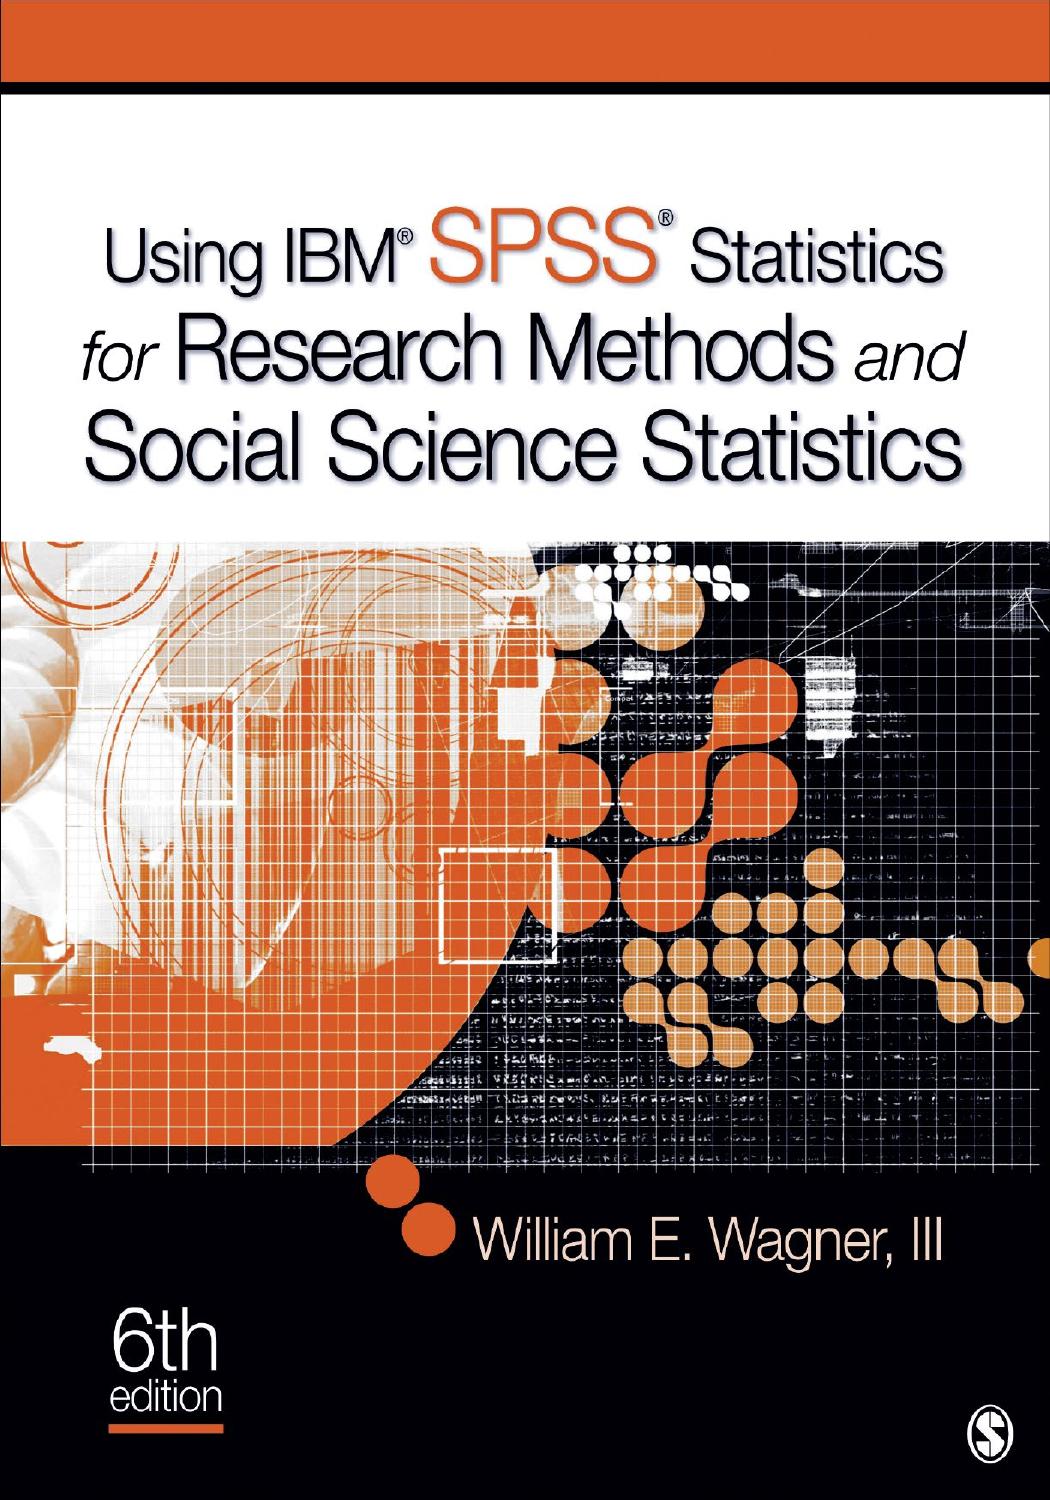 Using IBM(R) SPSS(R) Statistics for Research Methods and Social Science Statistics by William E. Wagner Iii